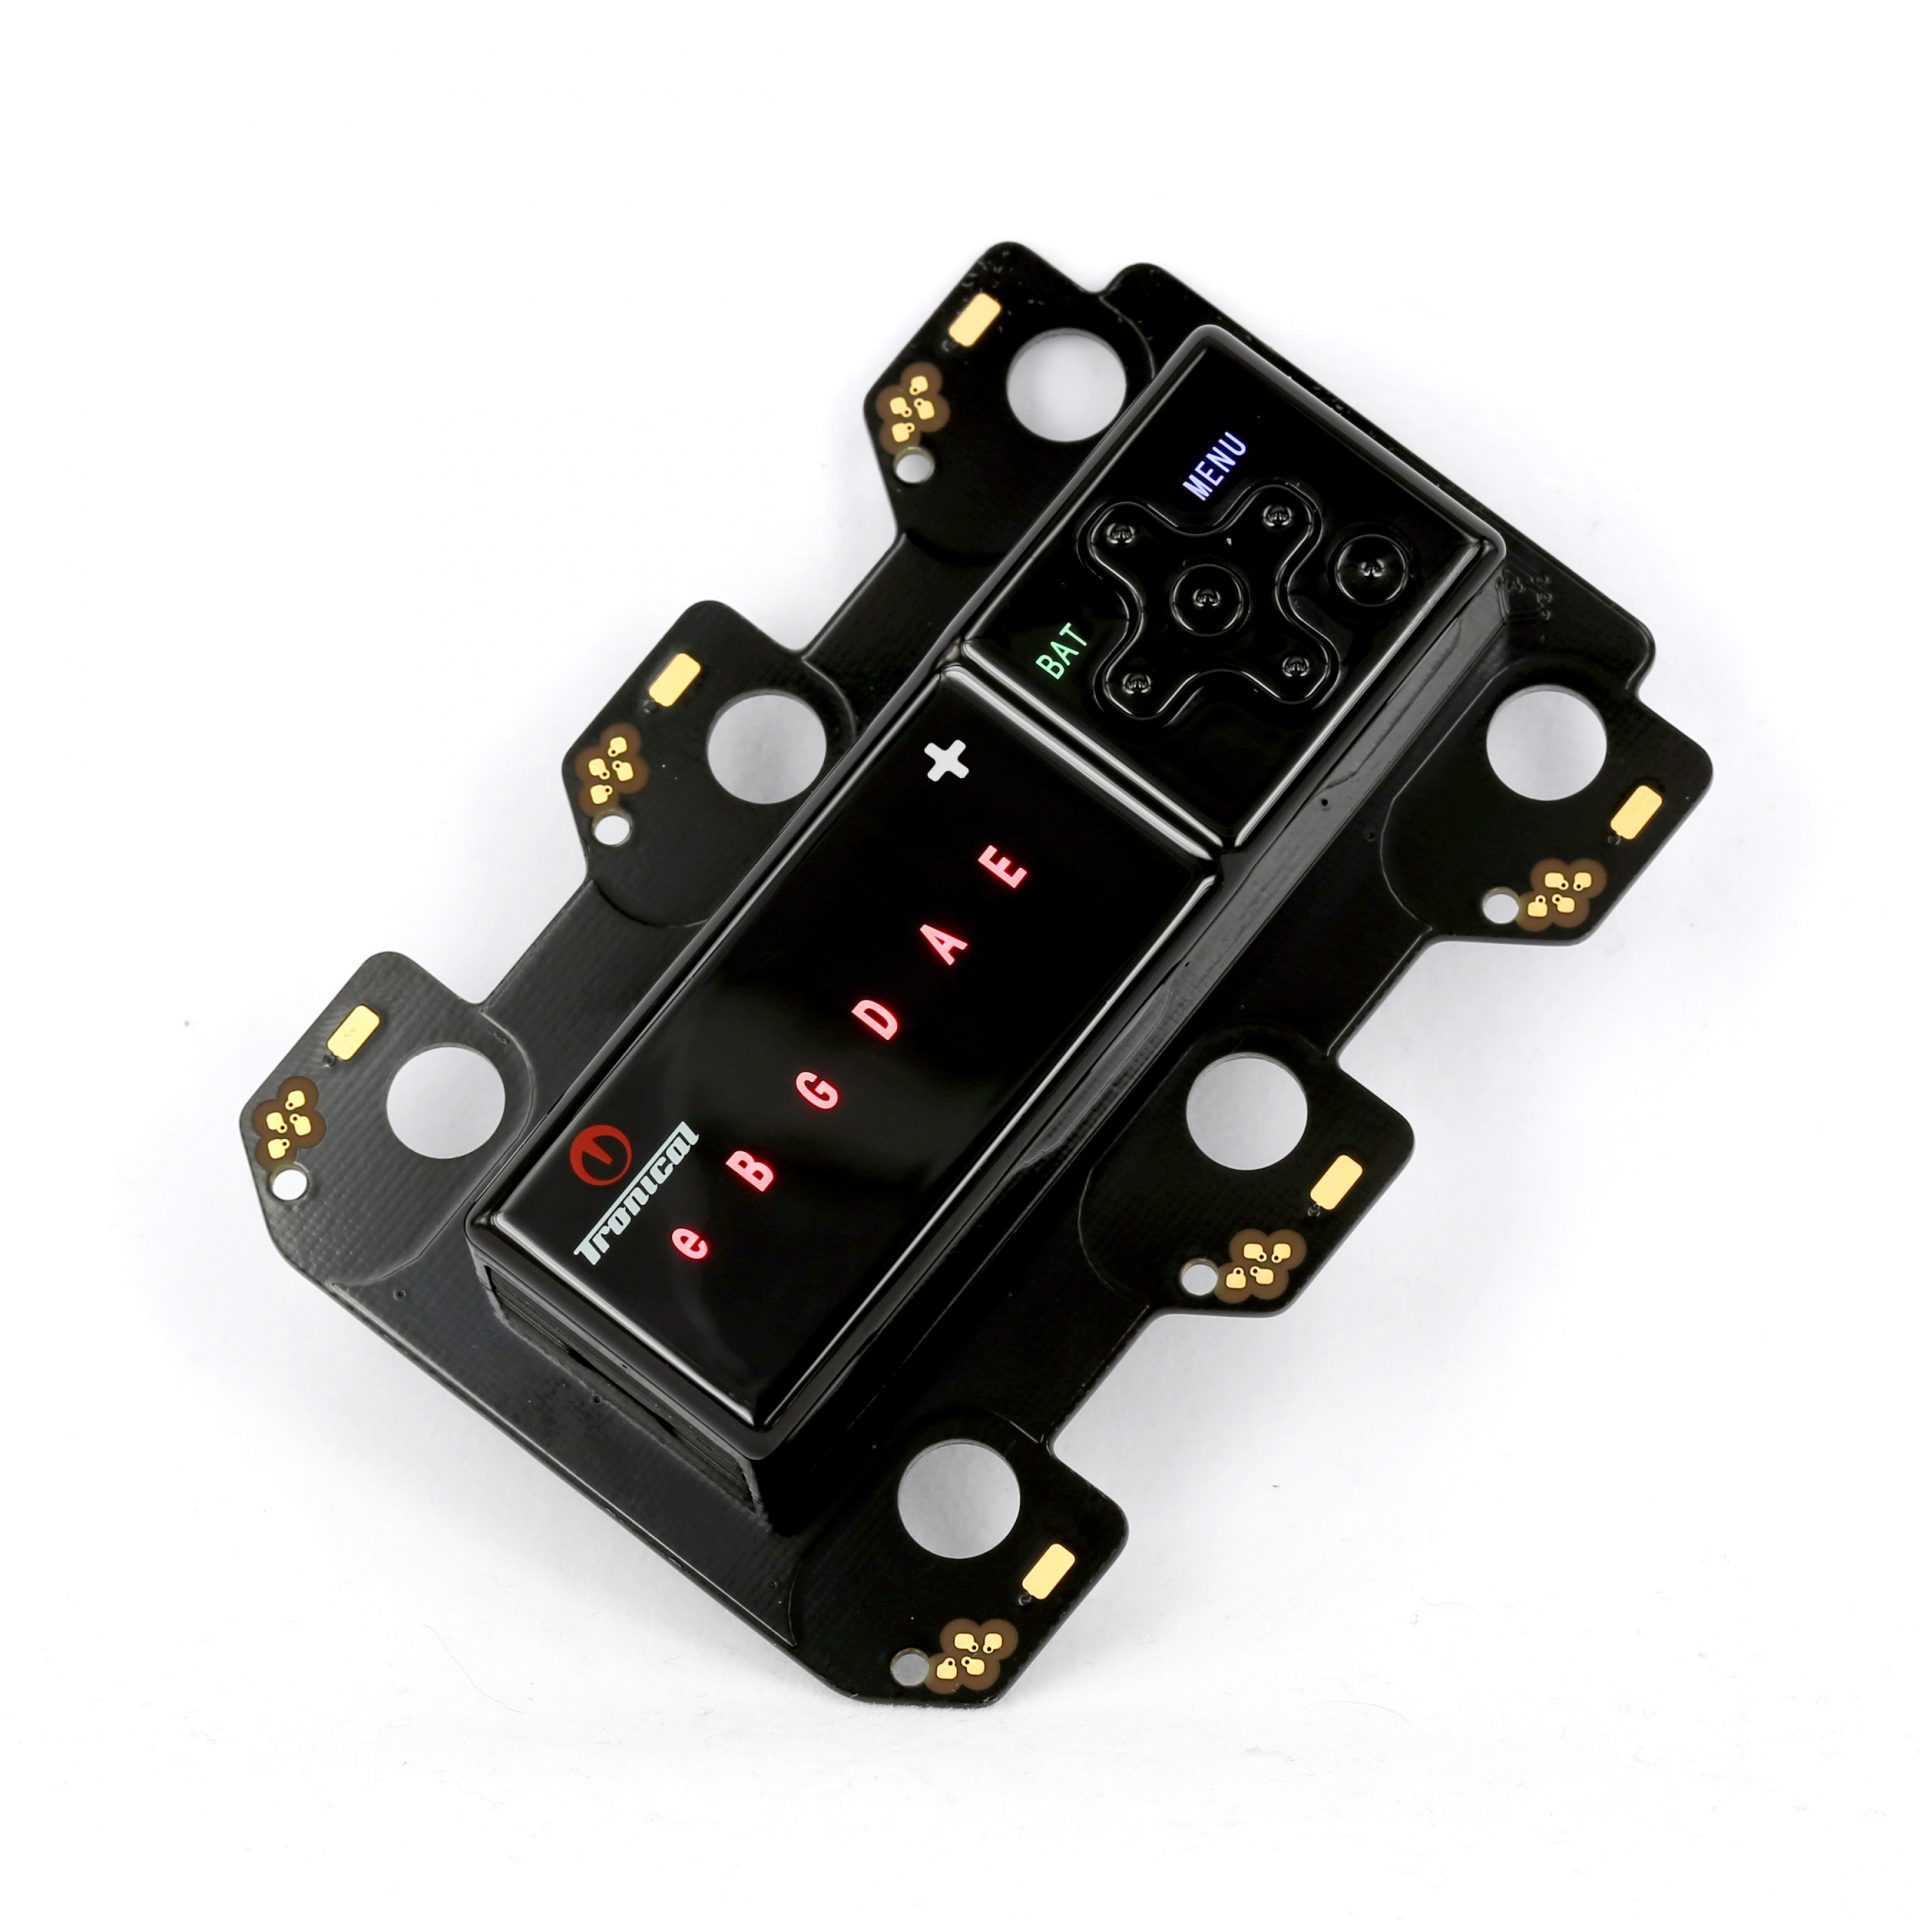 Tronical Spare Parts TronicalTune PLUS Electronic Upgrade for TronicalTune Guitar Tuner - unique Tronical Professional Tune Sytem autotunes Guitar